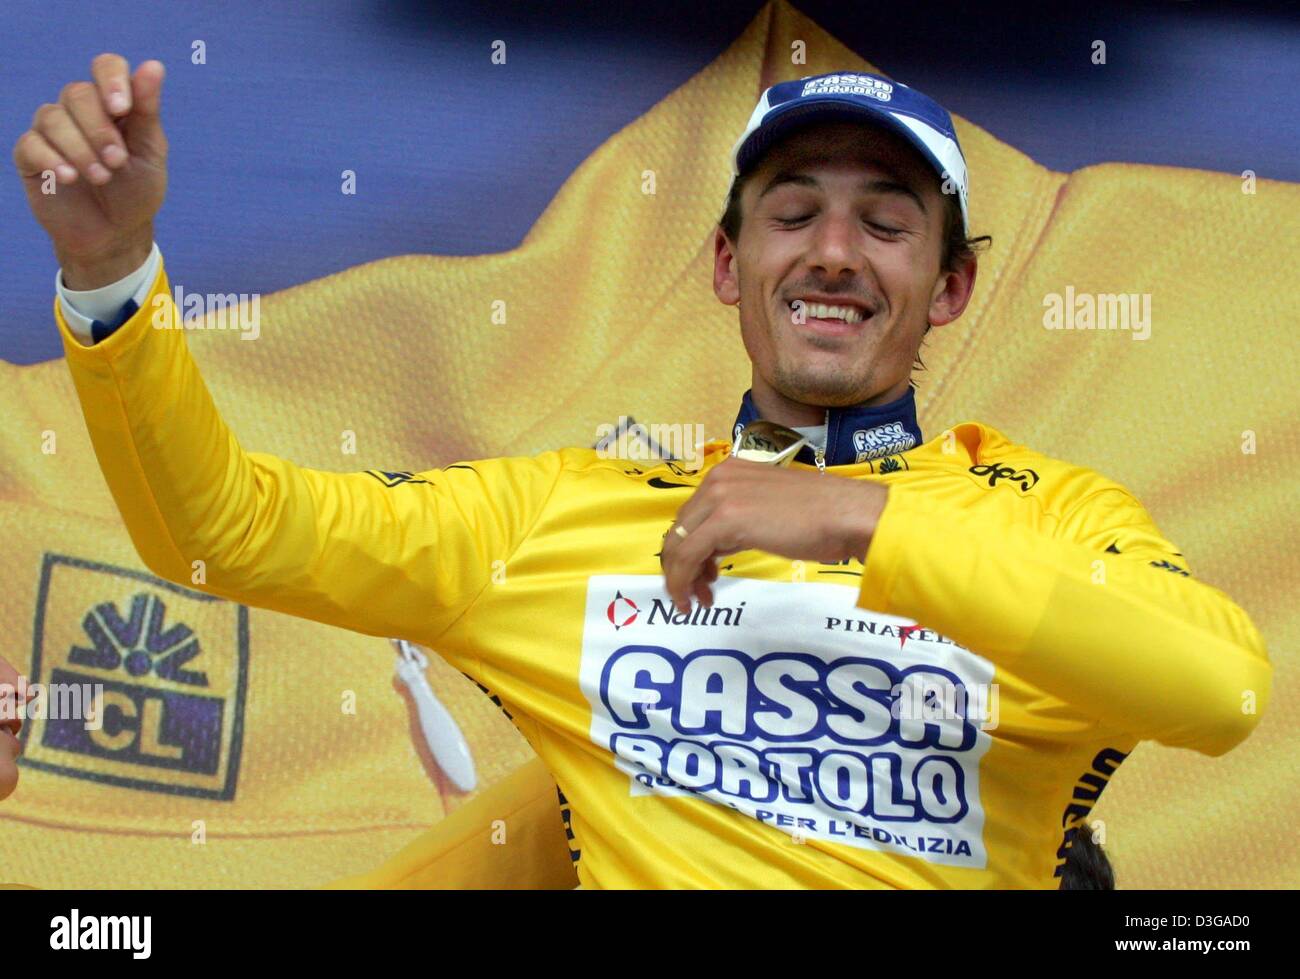 (dpa) - Swiss Fabian Cancellara of team Fassa Bortolo puts on the race leader's yellow jersey after the first stage of the Tour de France in Charleroi, Belgium, 4 July 2004. 23-year-old Cancellara did also win the prologue of the Tour de France the day before. The first and 202.5km long stage of the 91st Tour de France cycling race took the cyclists from Liege to Charleroi. Stock Photo